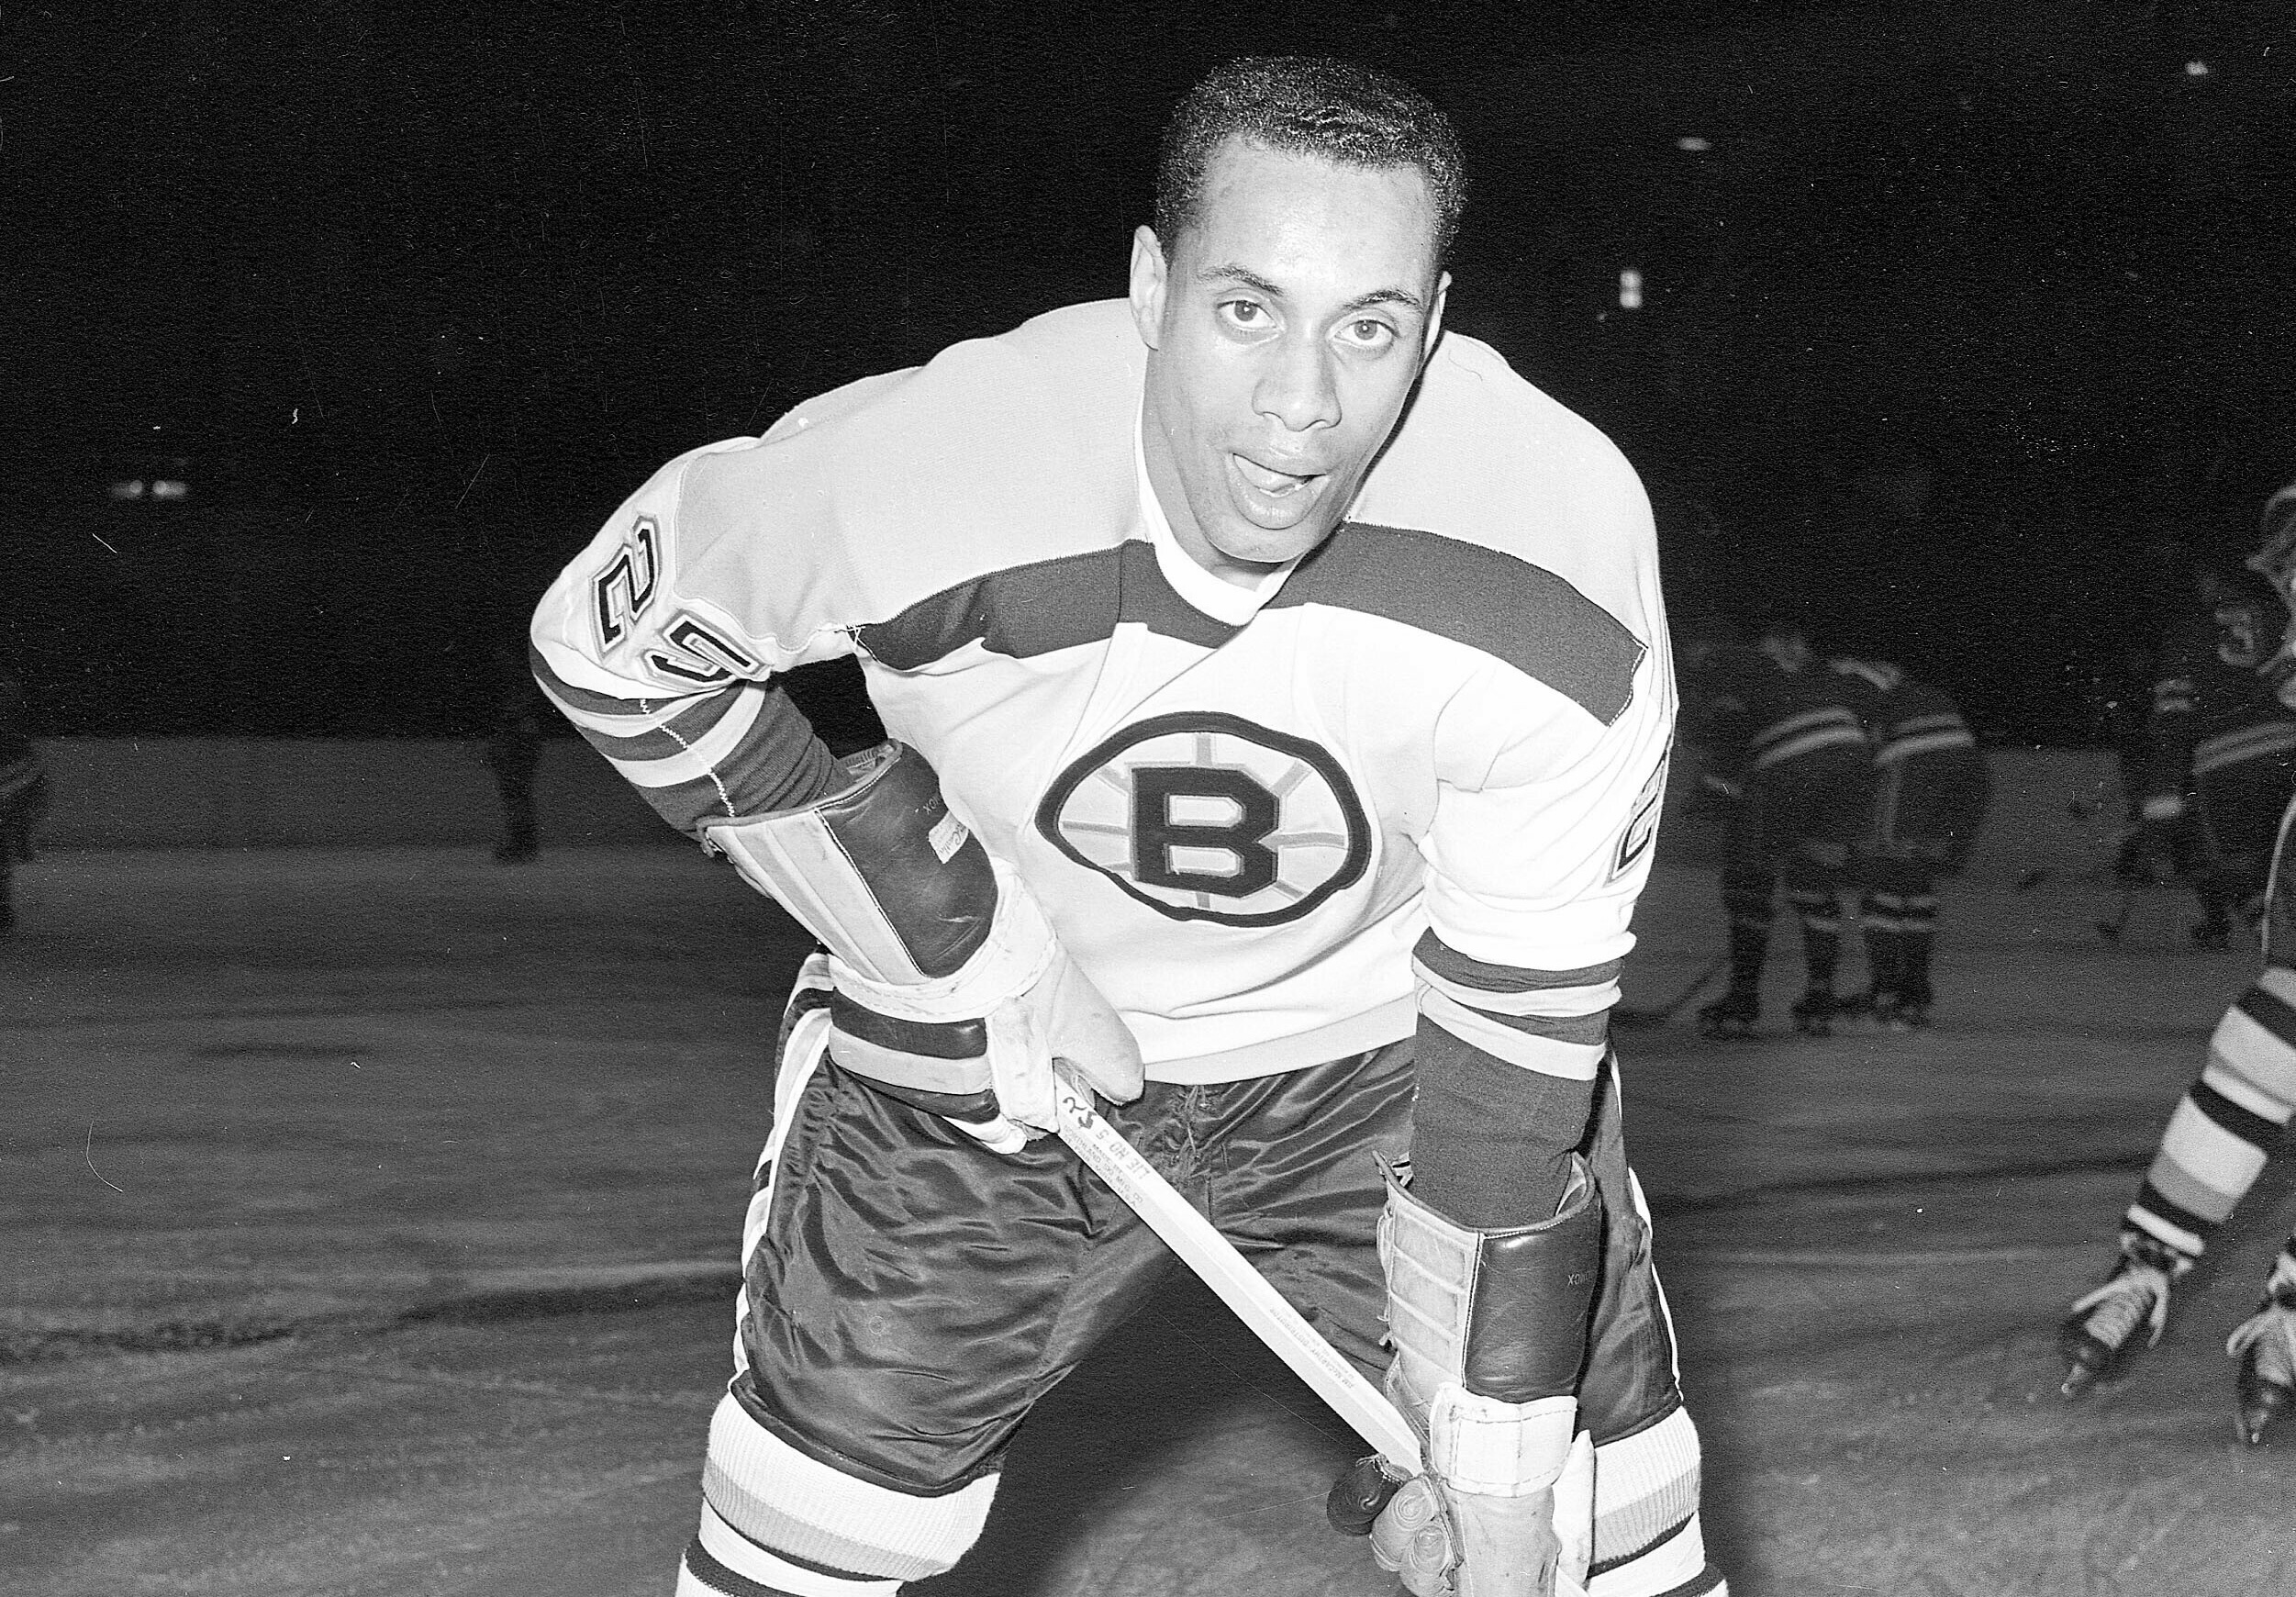 In this November 23, 1960, file photo, 25-year-old left wing Willie O'Ree, the first Black player of the National Hockey League, warms up in his Boston Bruins uniform, prior to the game with the New York Rangers, at New York's Madison Square Garden. Photo credit: The Associated Press